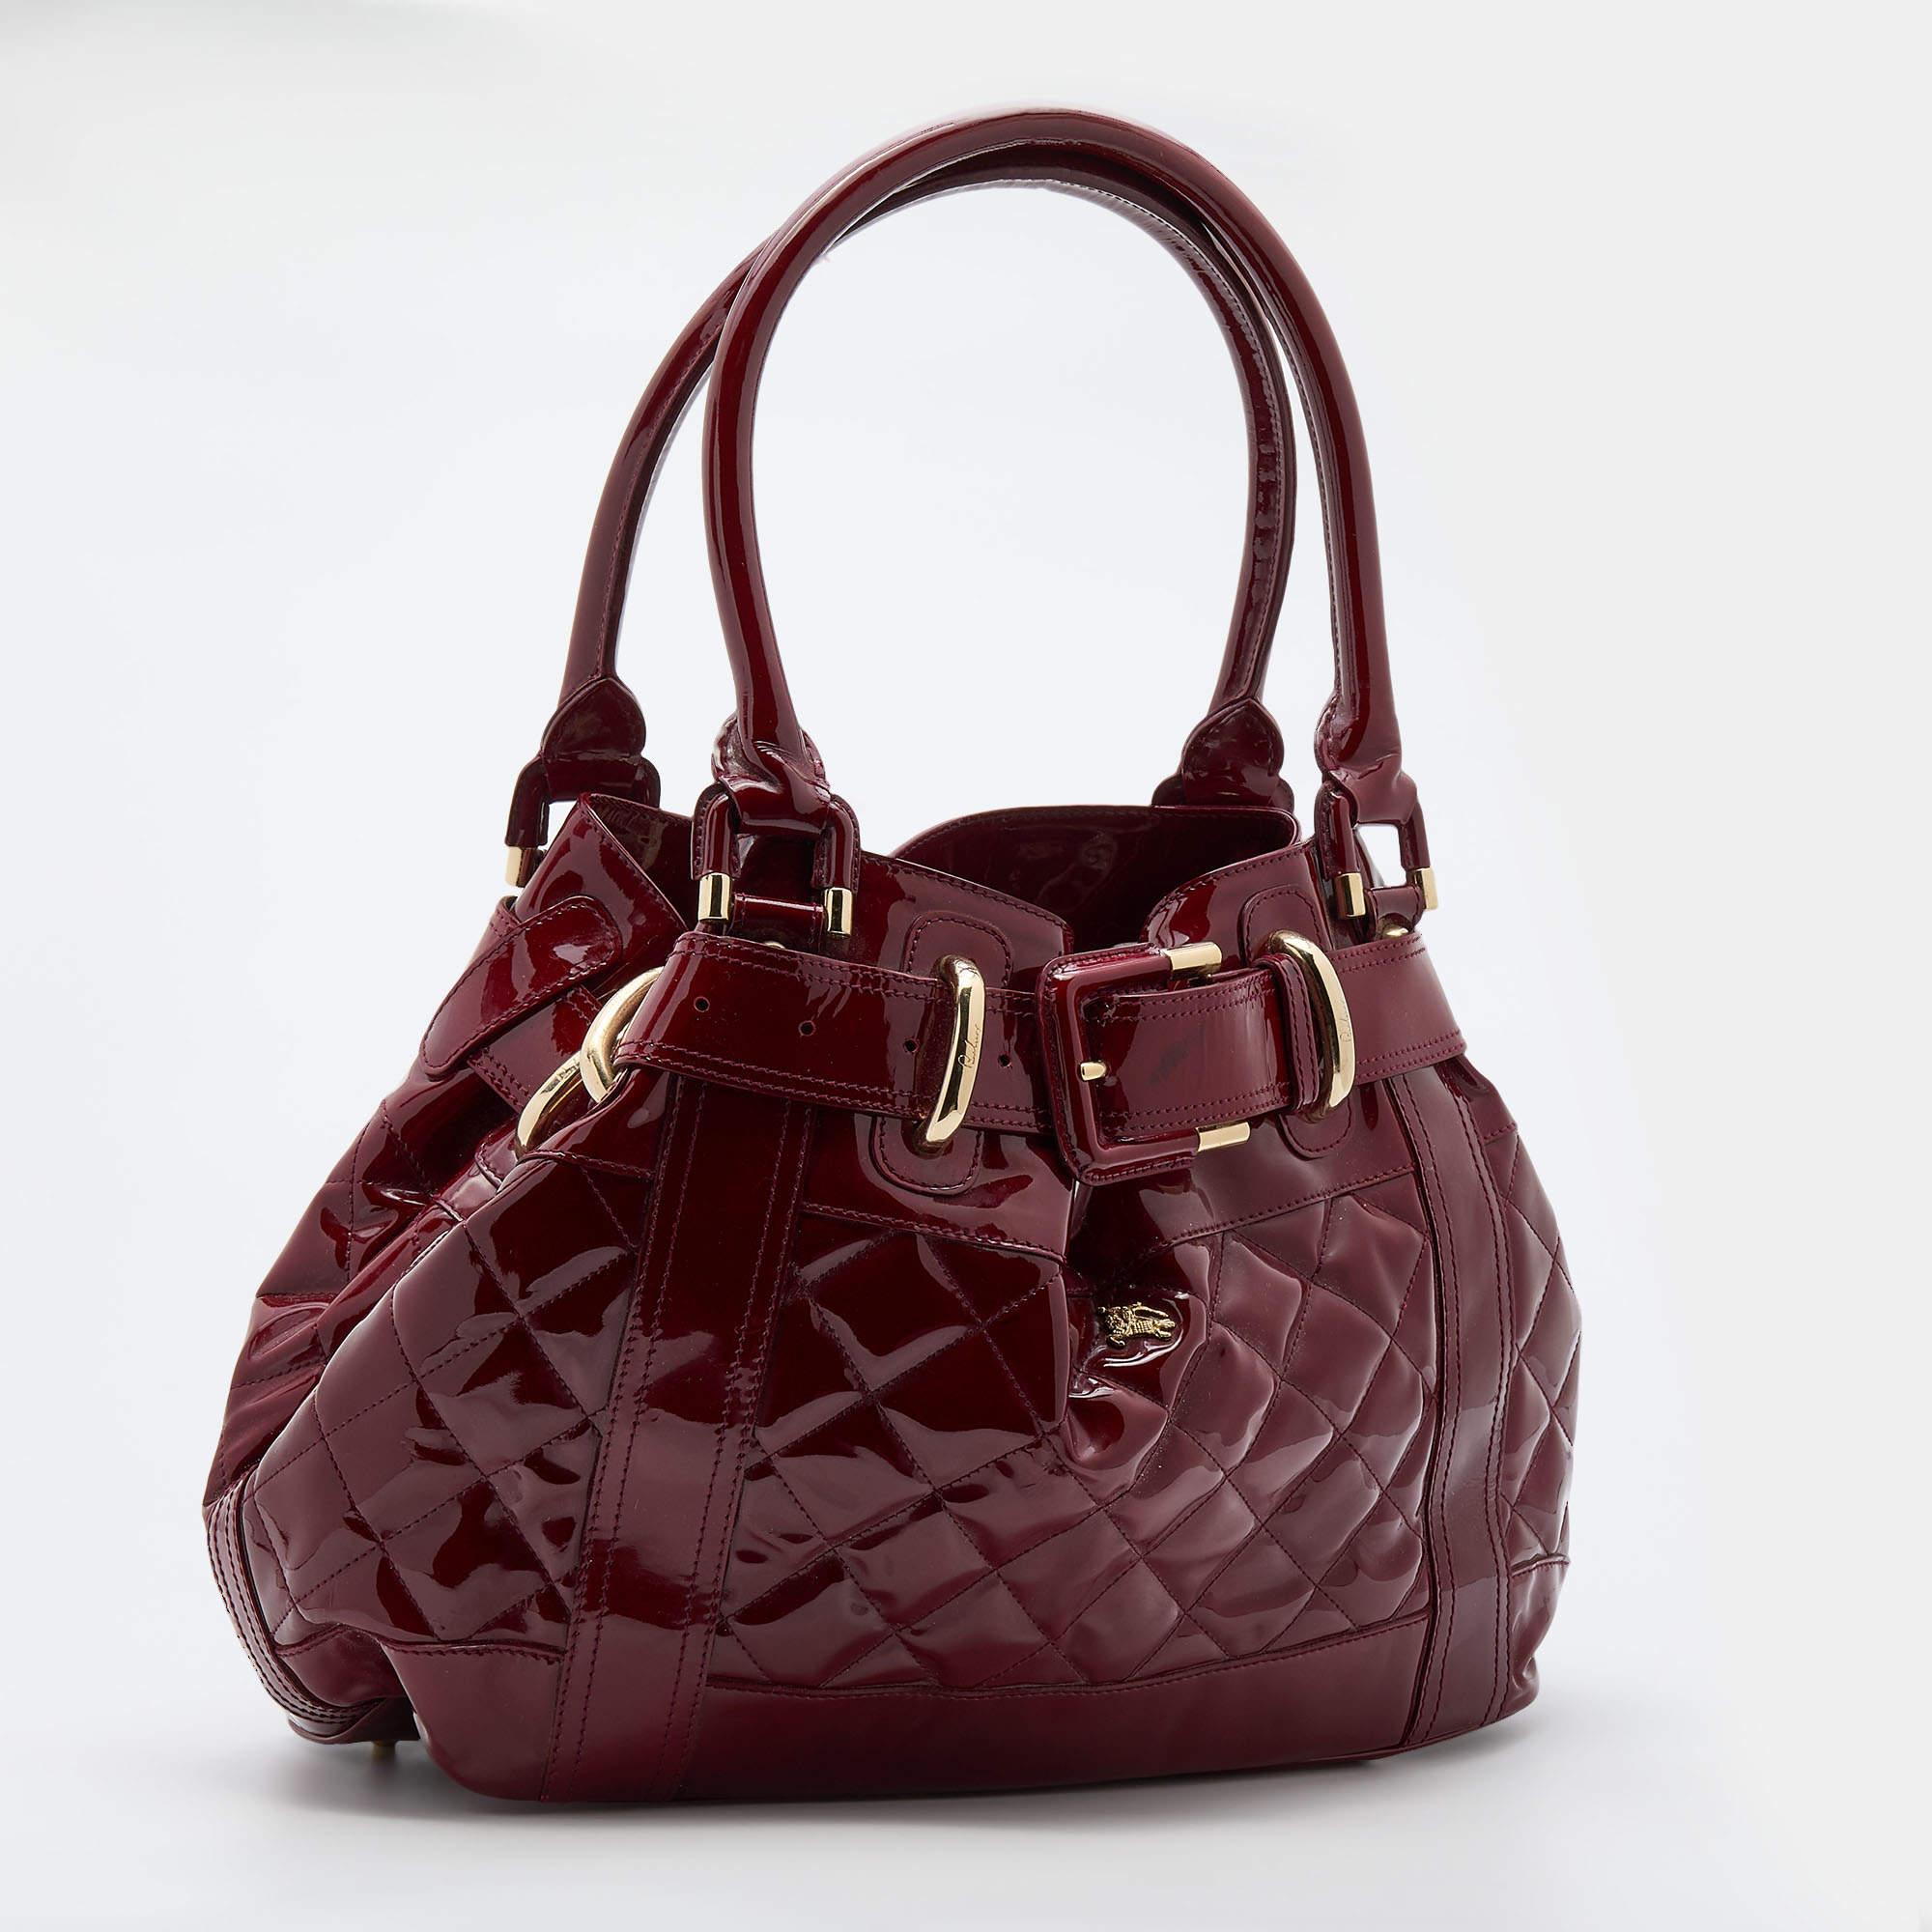 Burberry Red Patent Leather Quilted Prorsum Beaton Tote 1